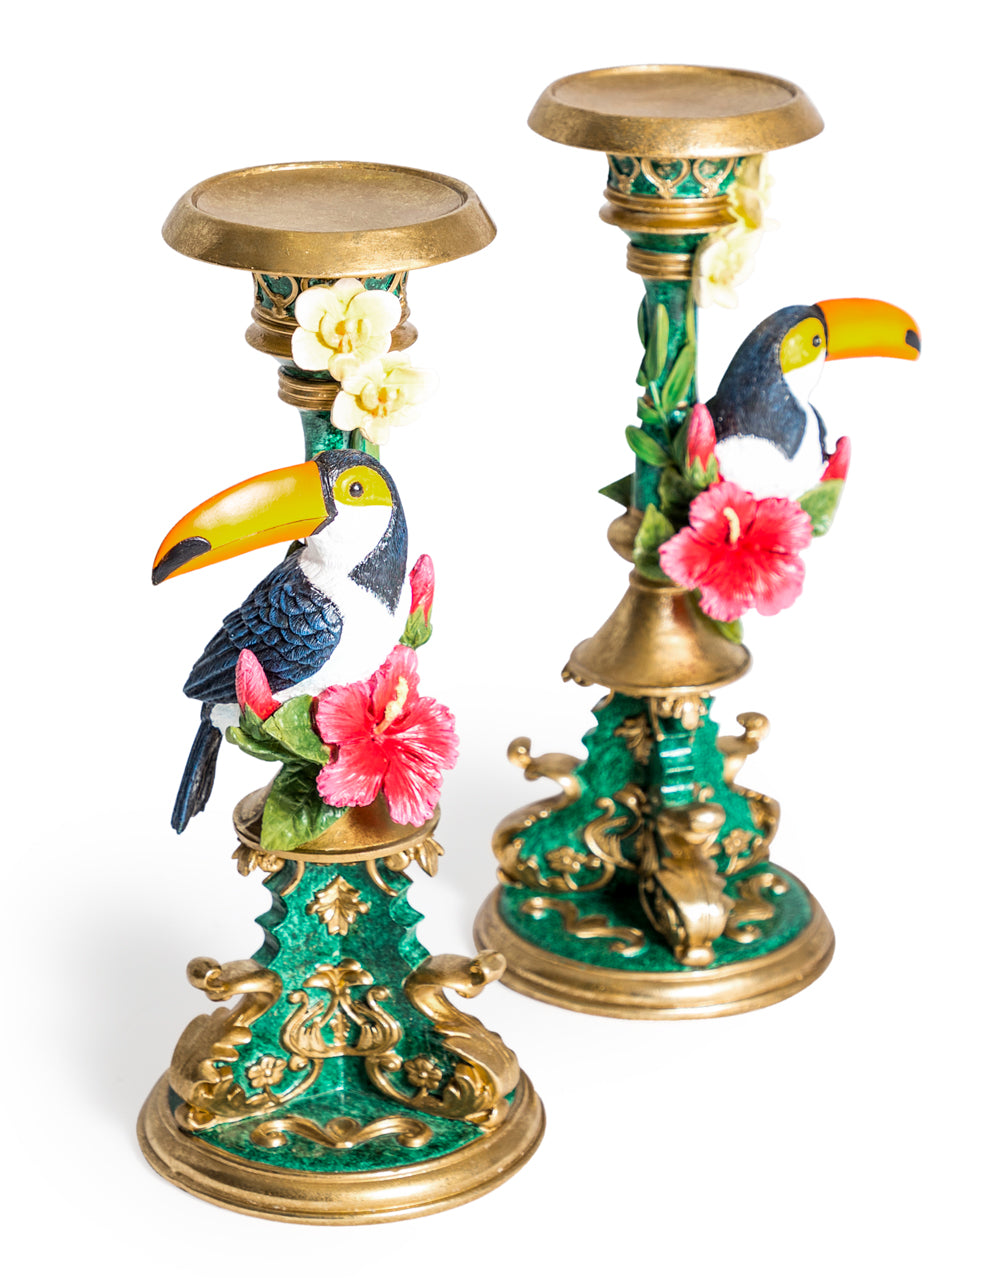 Pair of Ornate Toucan Candle Holders